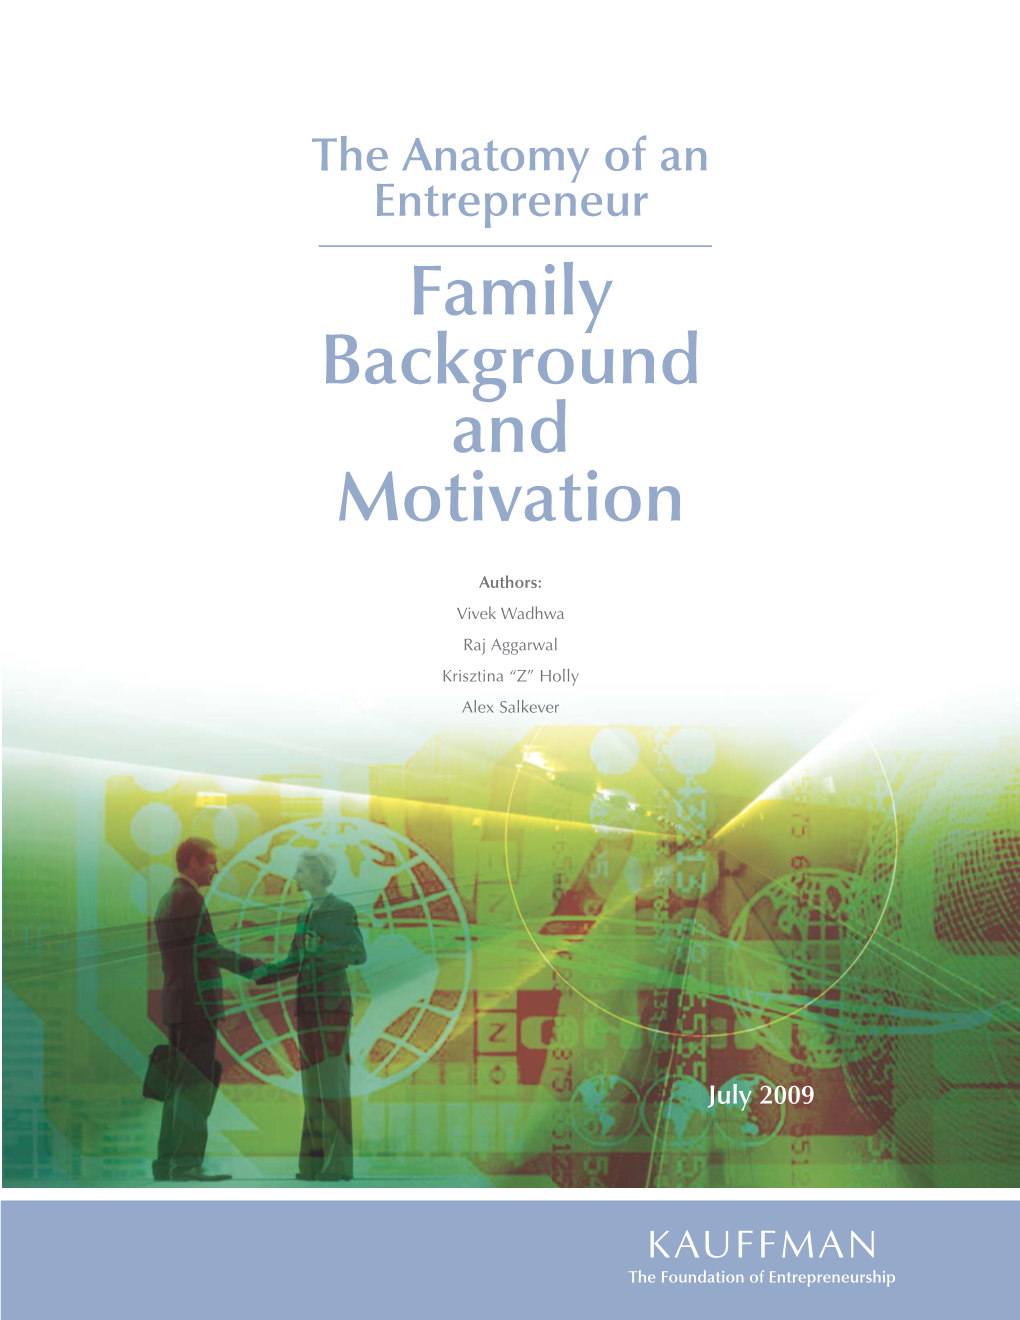 The Anatomy of an Entrepreneur: Family Background and Motivation 1 Table of Contents